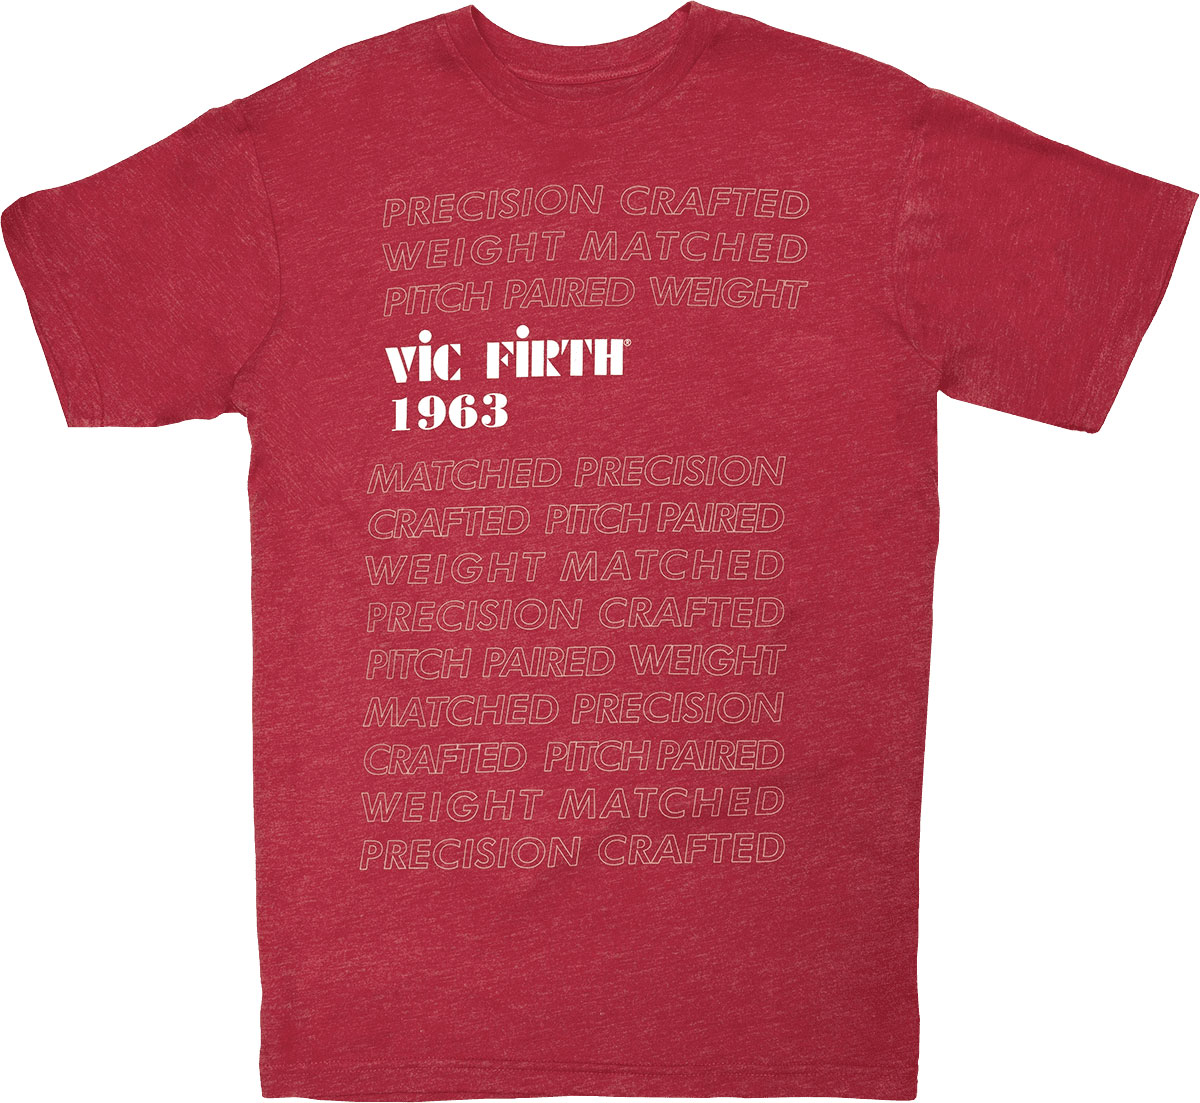 VIC FIRTH T-SHIRT 1963 RED GRAPHIC XL